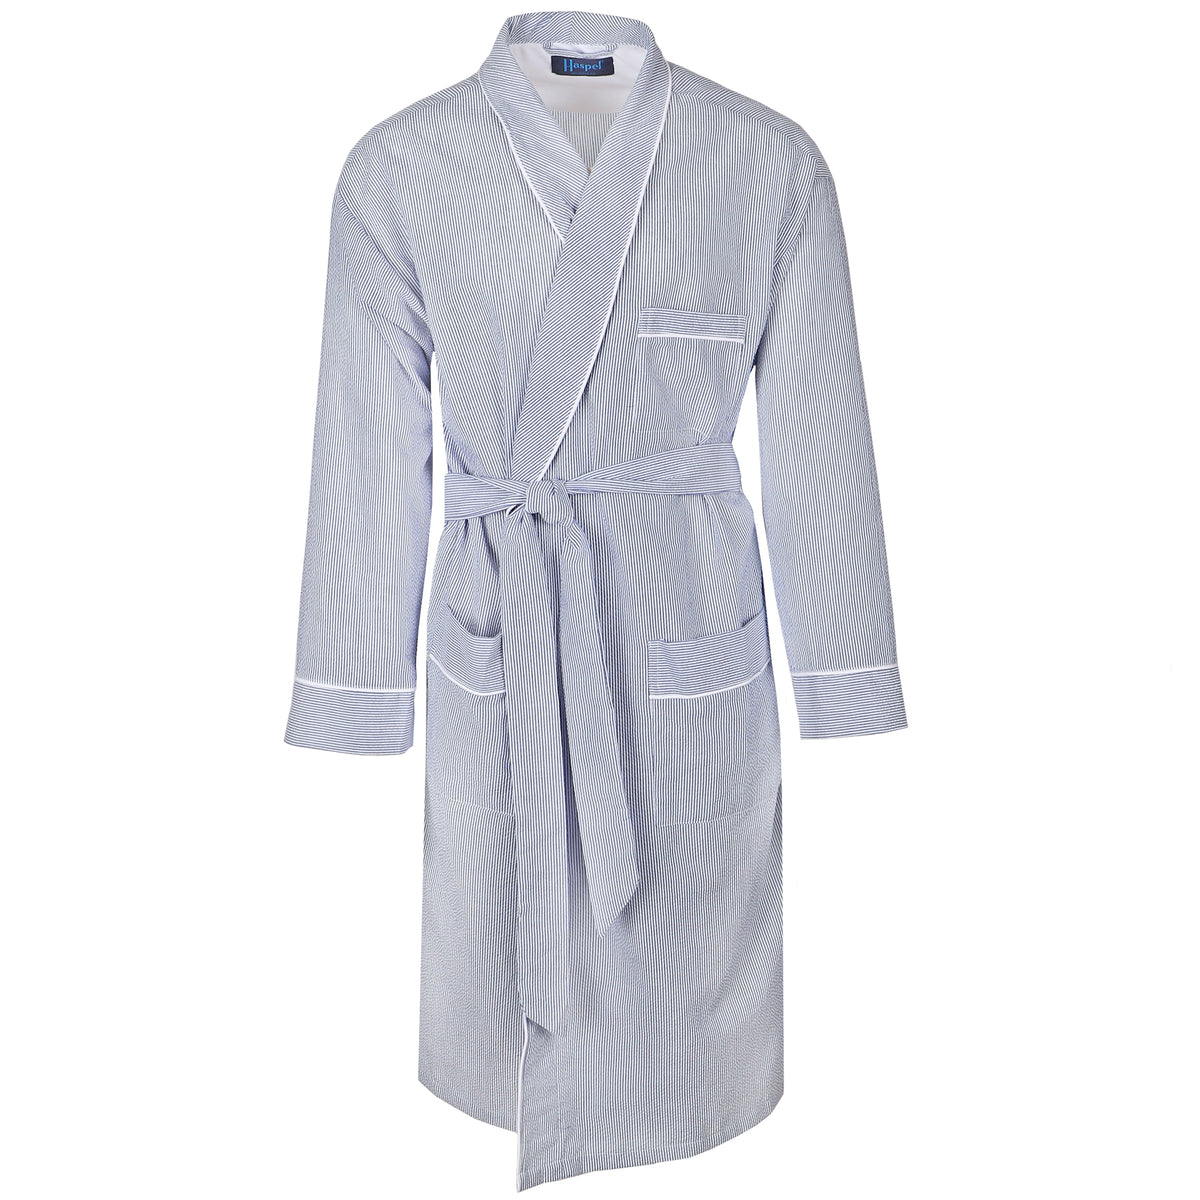 Soft and light and oh-so-right. Our seersucker robe is perfect for those lazy days around the house. Looks stunning while scratching absolutely nothing off of your honey-do list.  Unlined  •  Machine Washable  •  100% Cotton Seersucker  •  Left Chest Pocket  •  Two Patch Pockets  •  Inner Tie  •  Outer Belt Tie with Loops  •  Navy &amp; White Seersucker  •  One Size Fits All  •  Imported